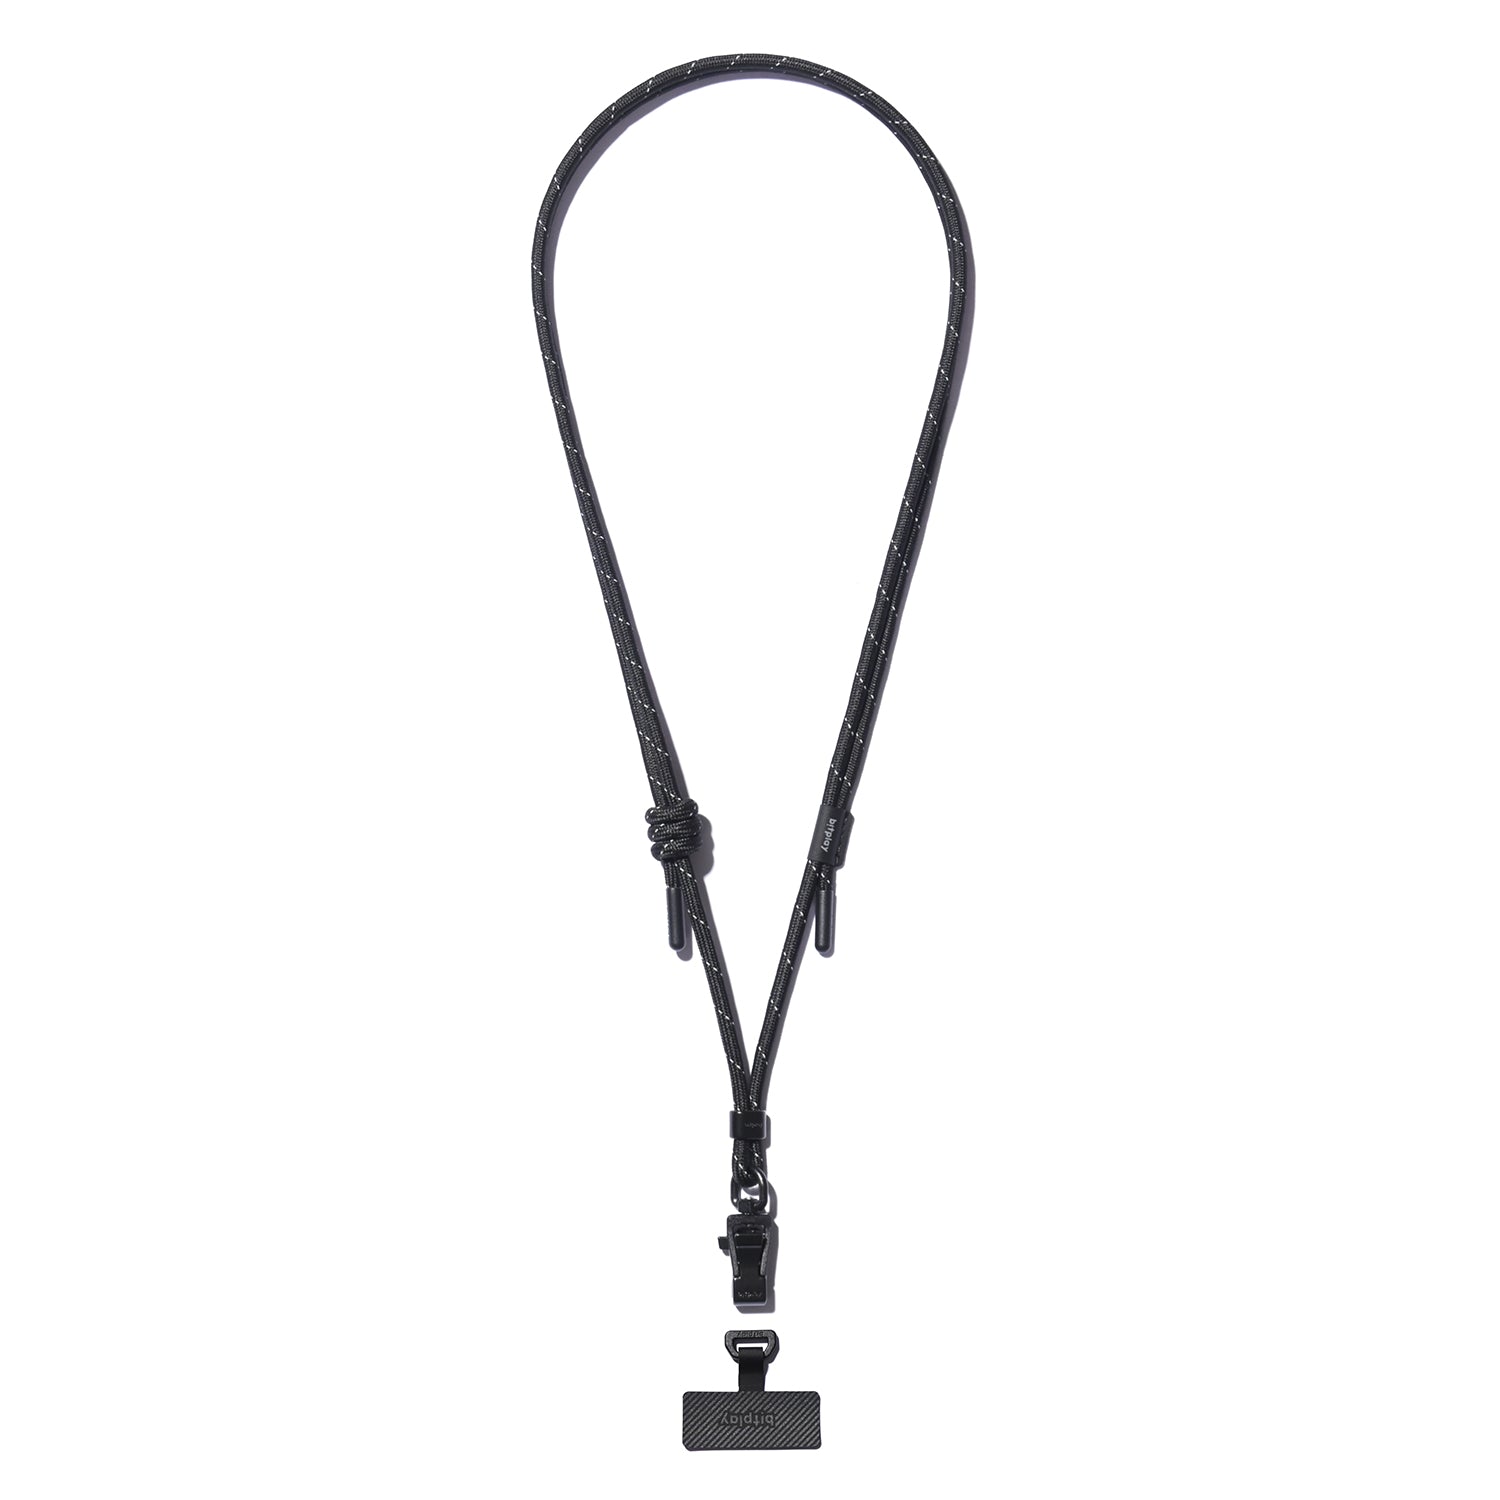 6mm Lite Strap - Black (Strap Adapter included）